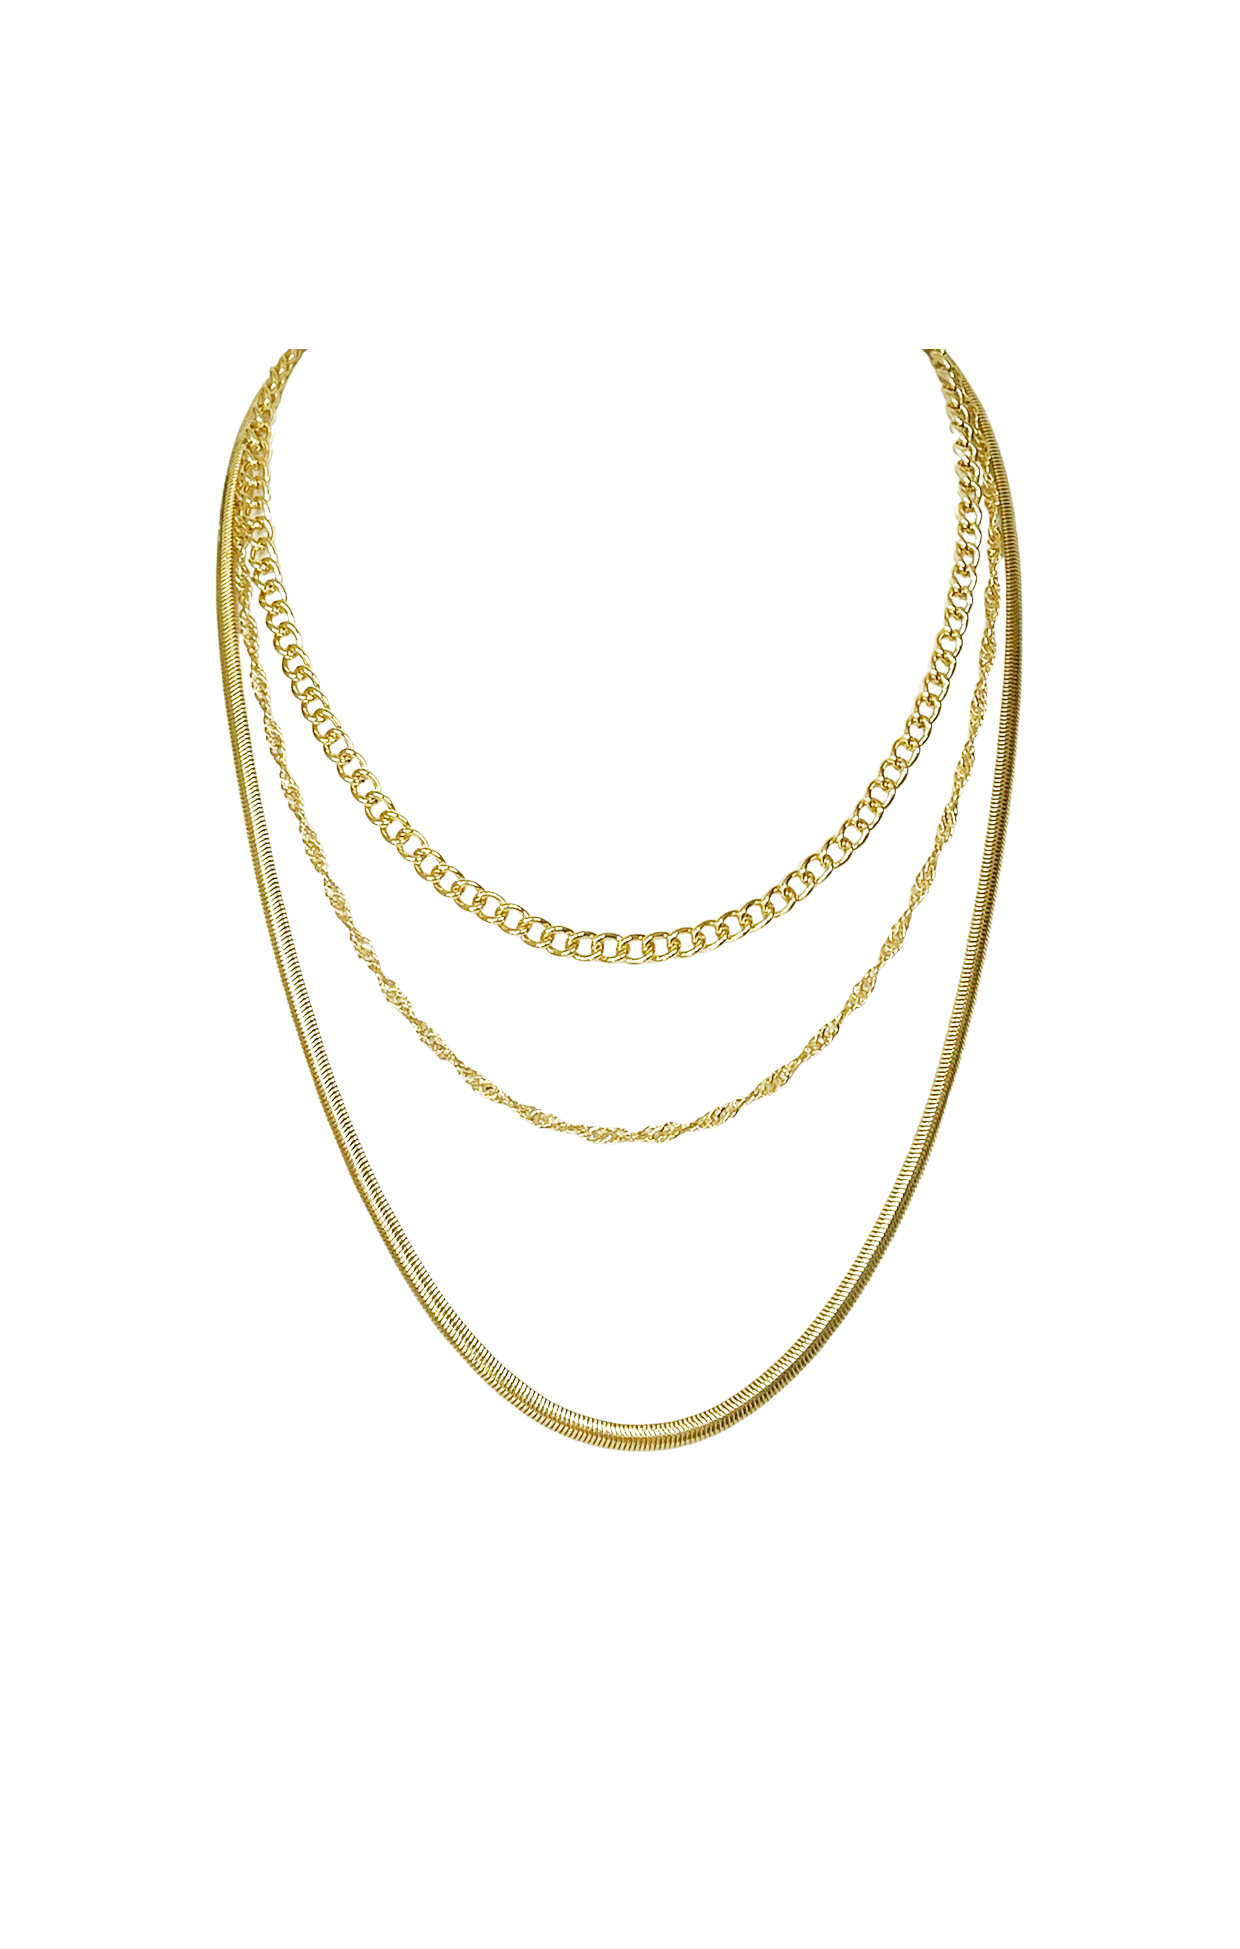 ACCESSORIES Necklaces One Size / Neutral HERRINGBONE LAYERED NECKLACE IN GOLD